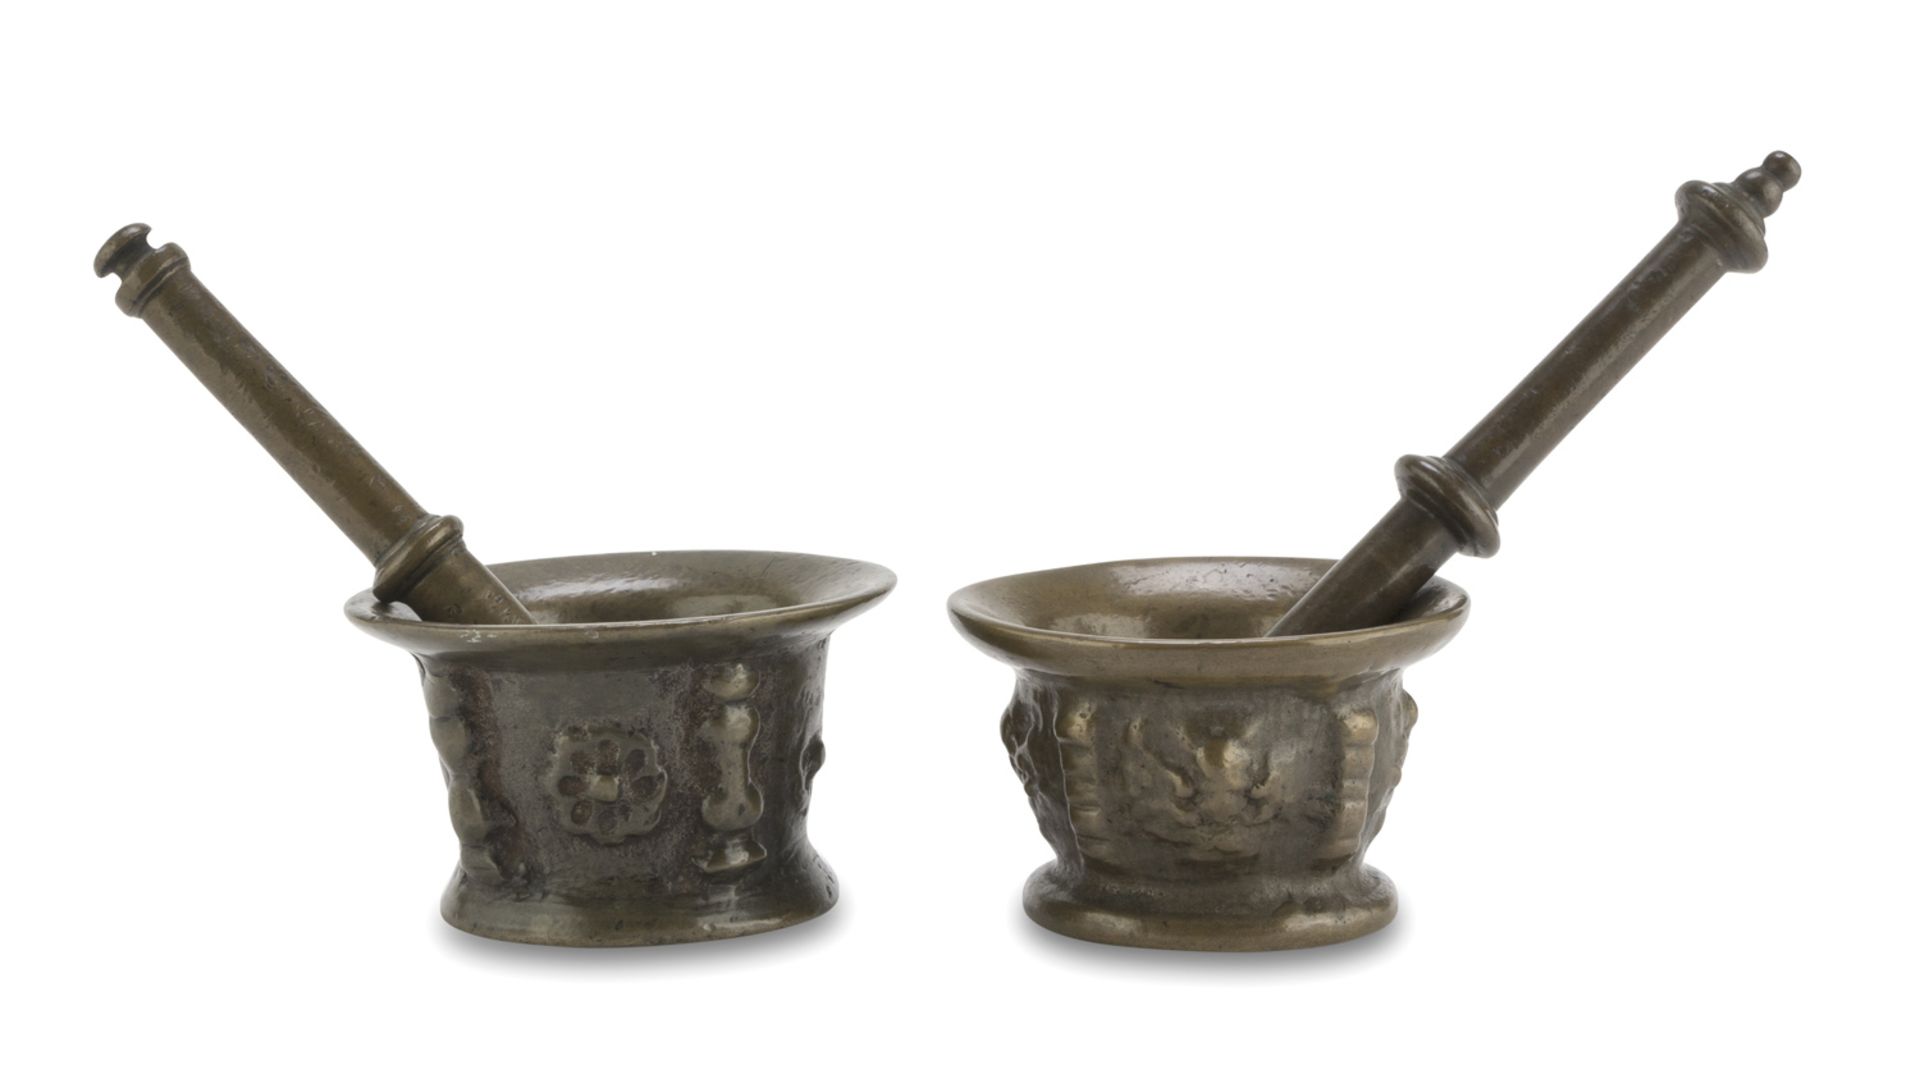 PAIR OF BRONZE MORTARS WITH PESTLES END OF THE 16TH CENTURY